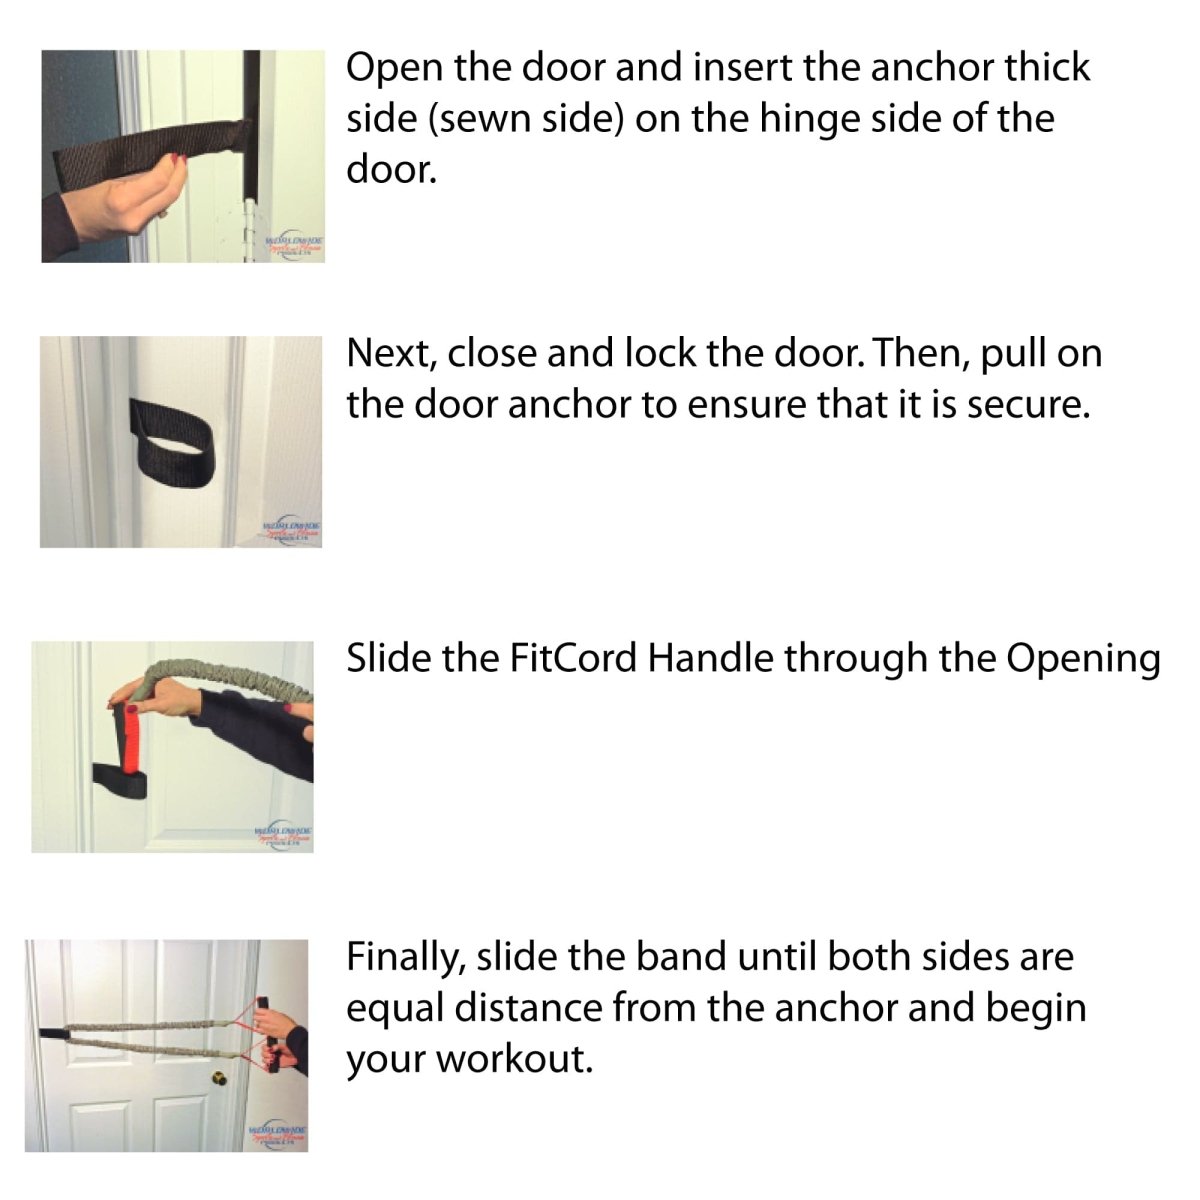 Instructions to use a door anchor for resistance exercise workout bands. FitCord Door Anchor how to guide.